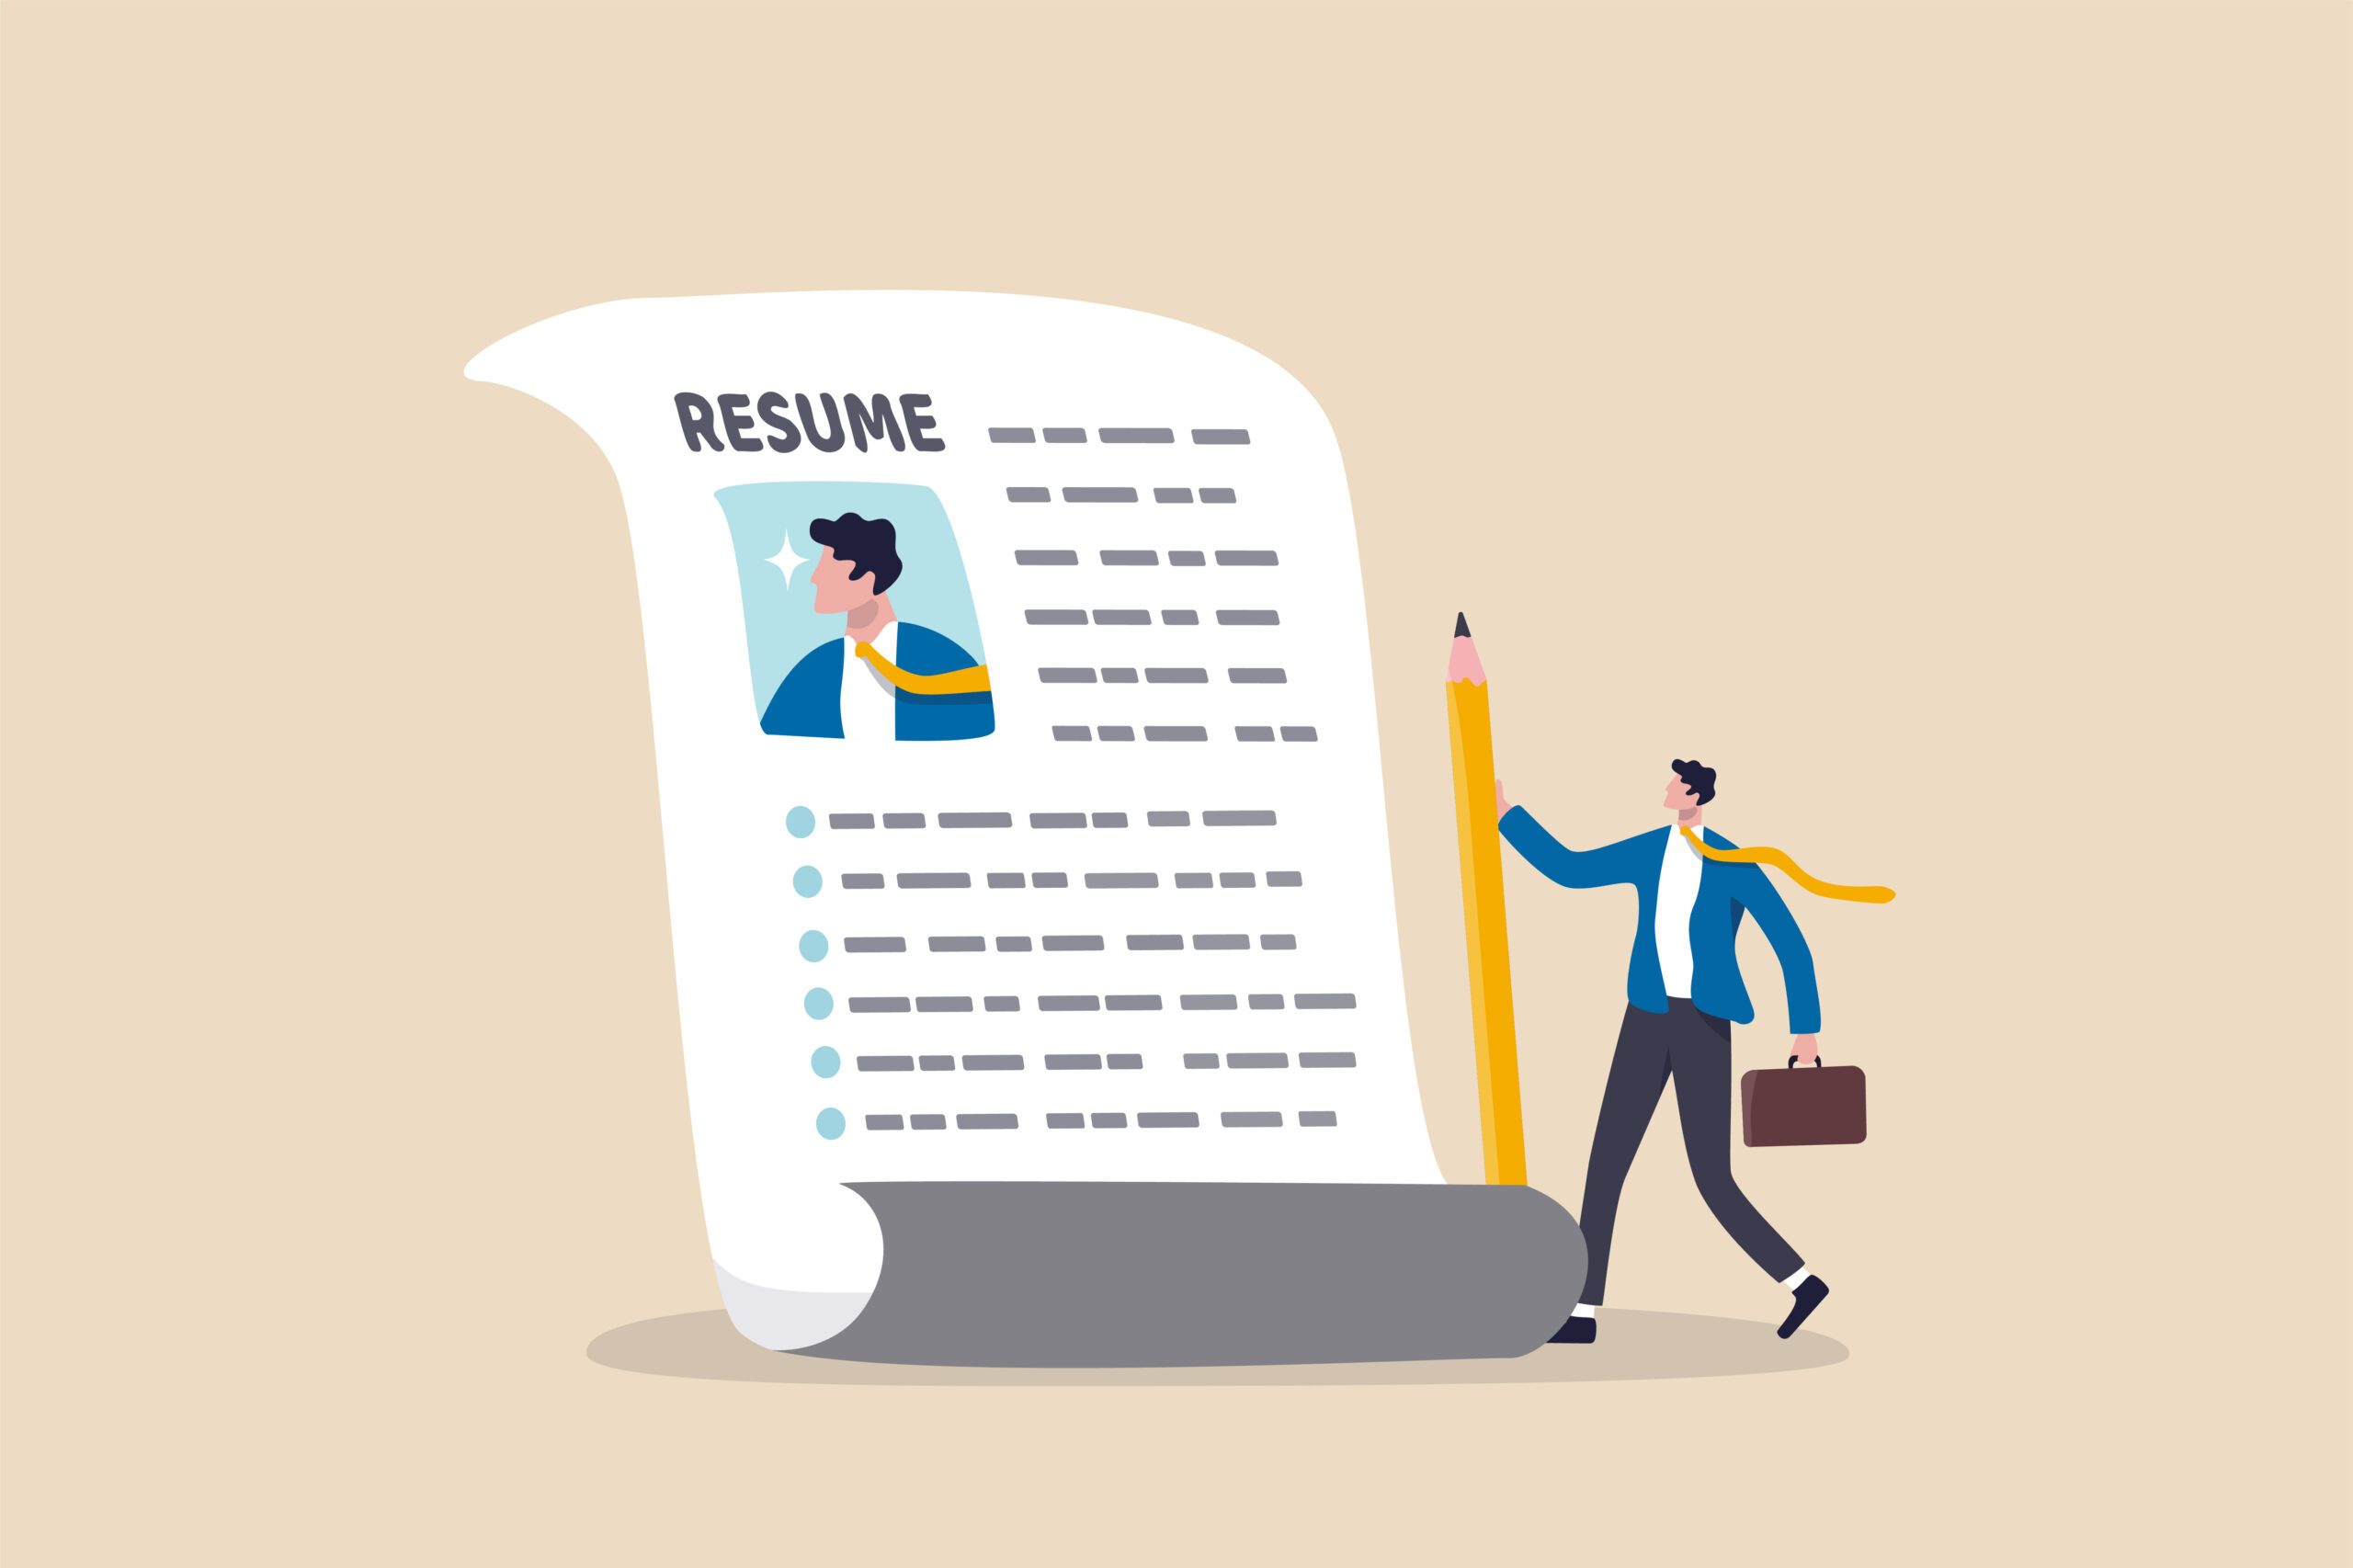 An illustration a person and their resume to represent the resume advice for veterans.